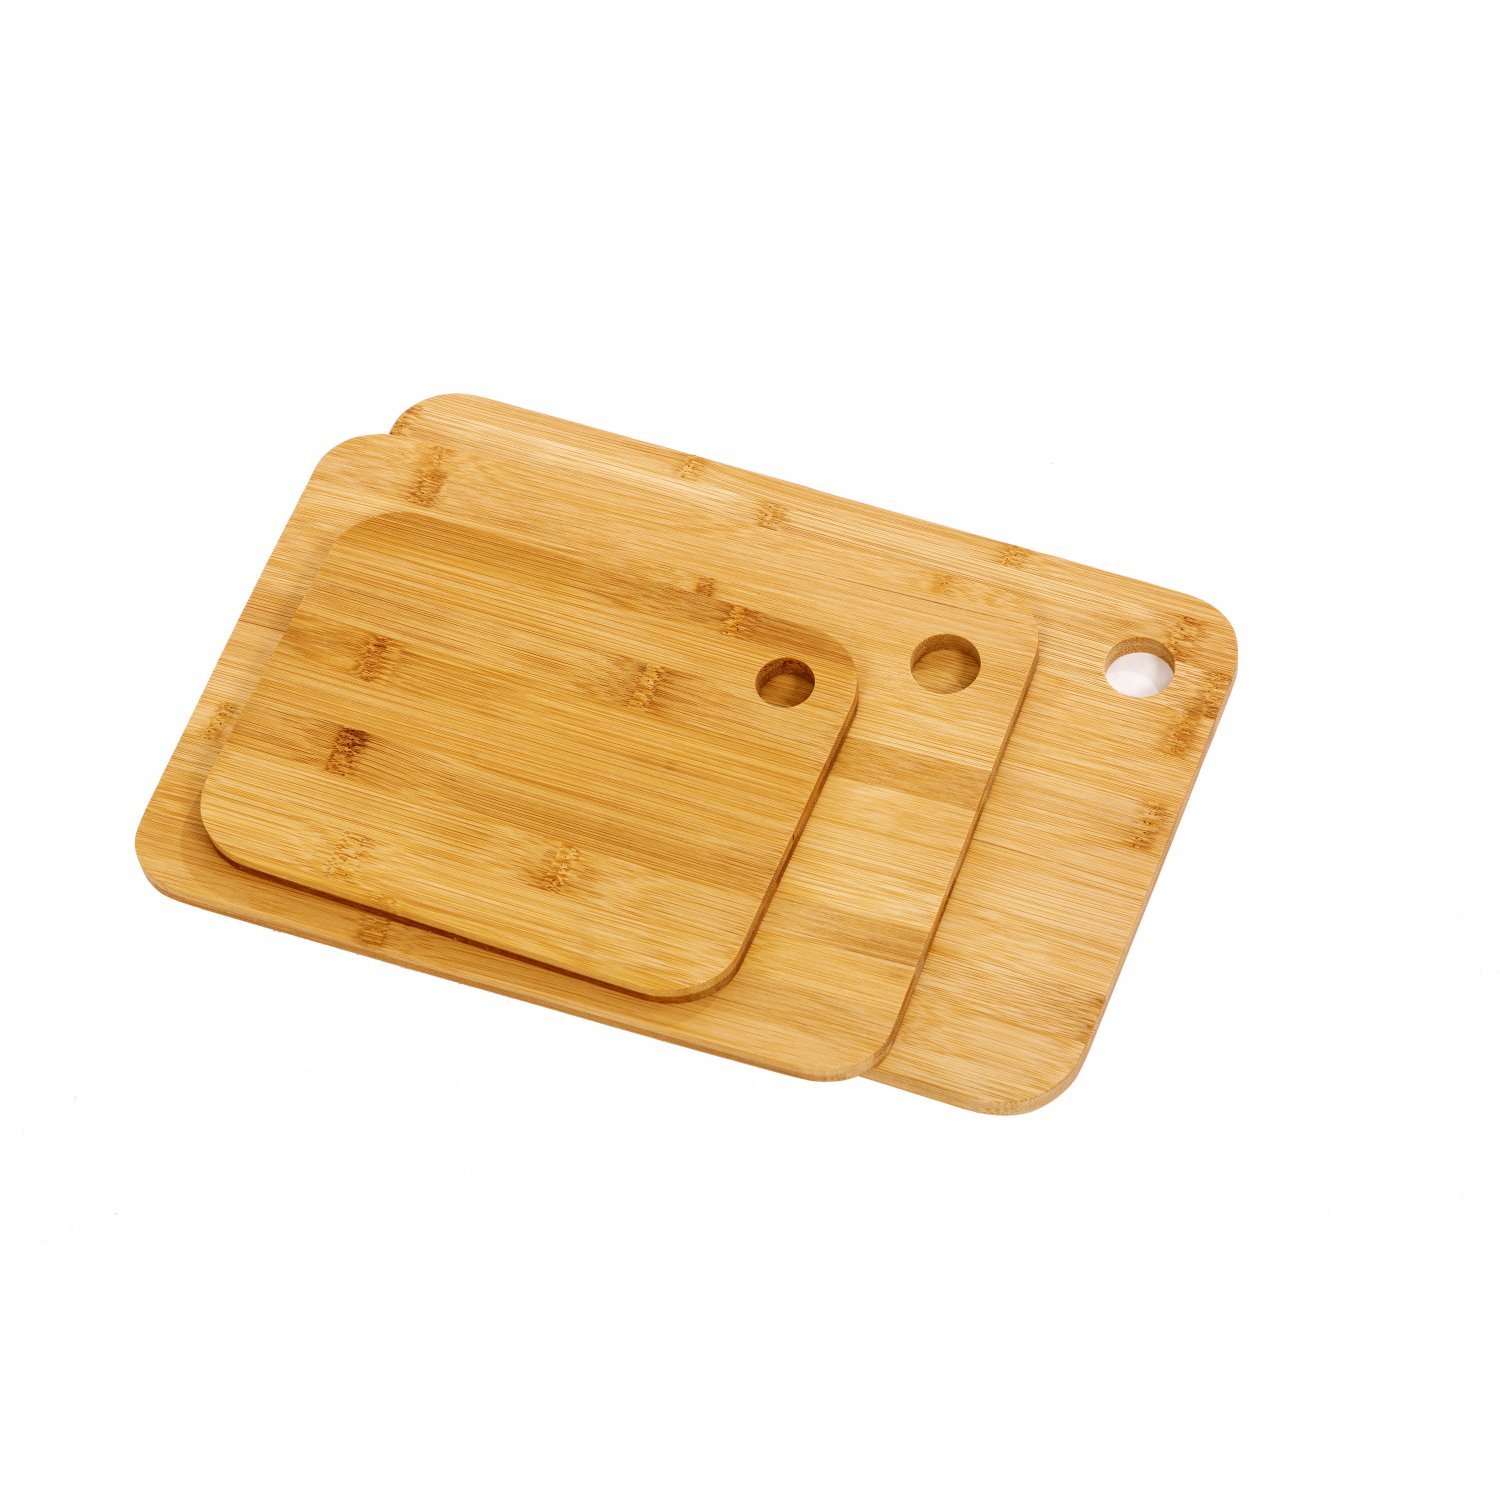 https://oypla.com/images/products/4141-3-piece-bamboo-wooden-chopping-cutting-board-kitchen-set-02.jpg